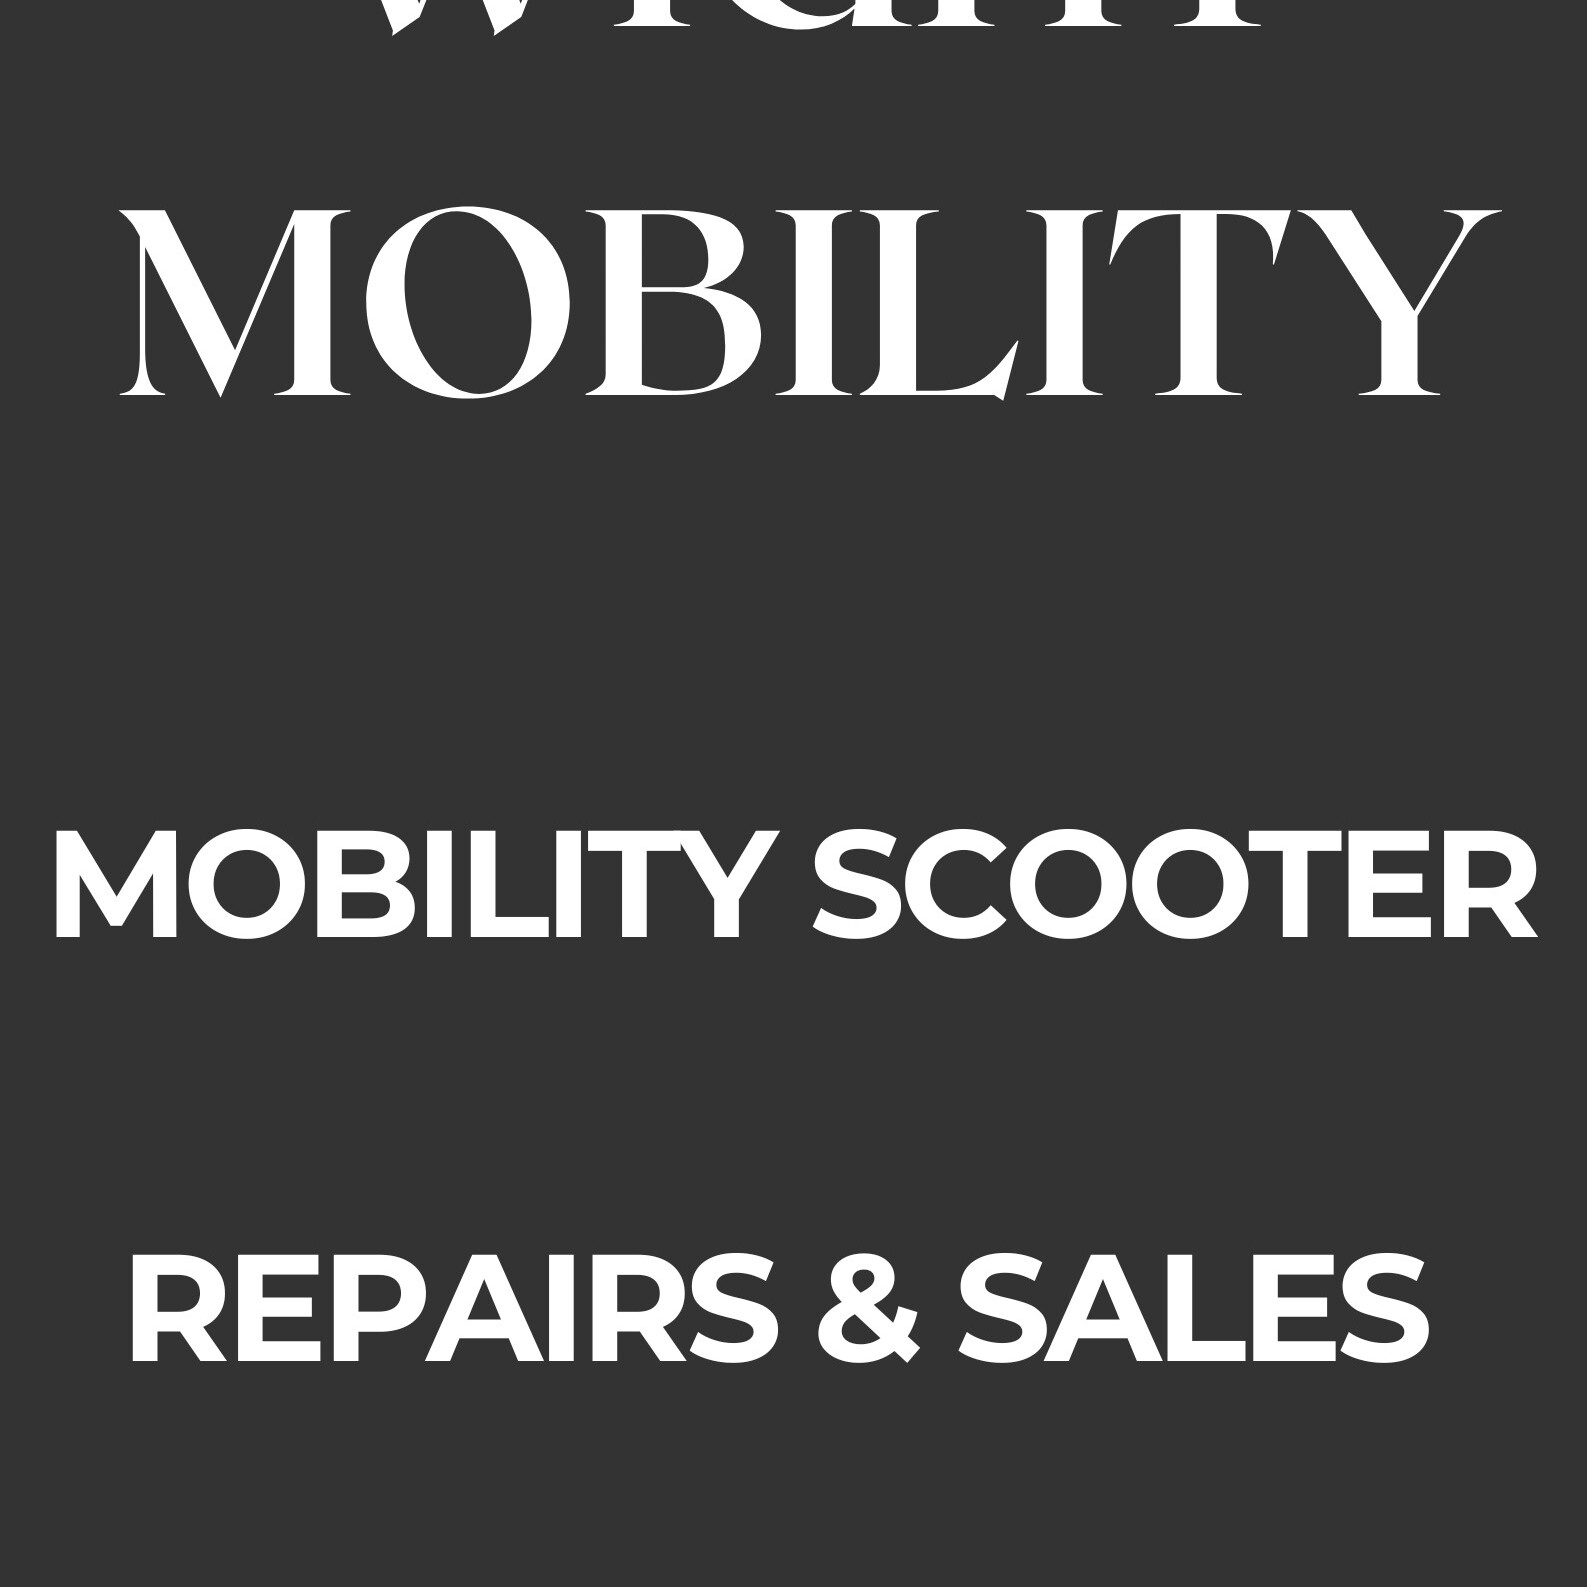 Isle of wight Mobility scooter hire - Newport, Isle of Wight, United Kingdom